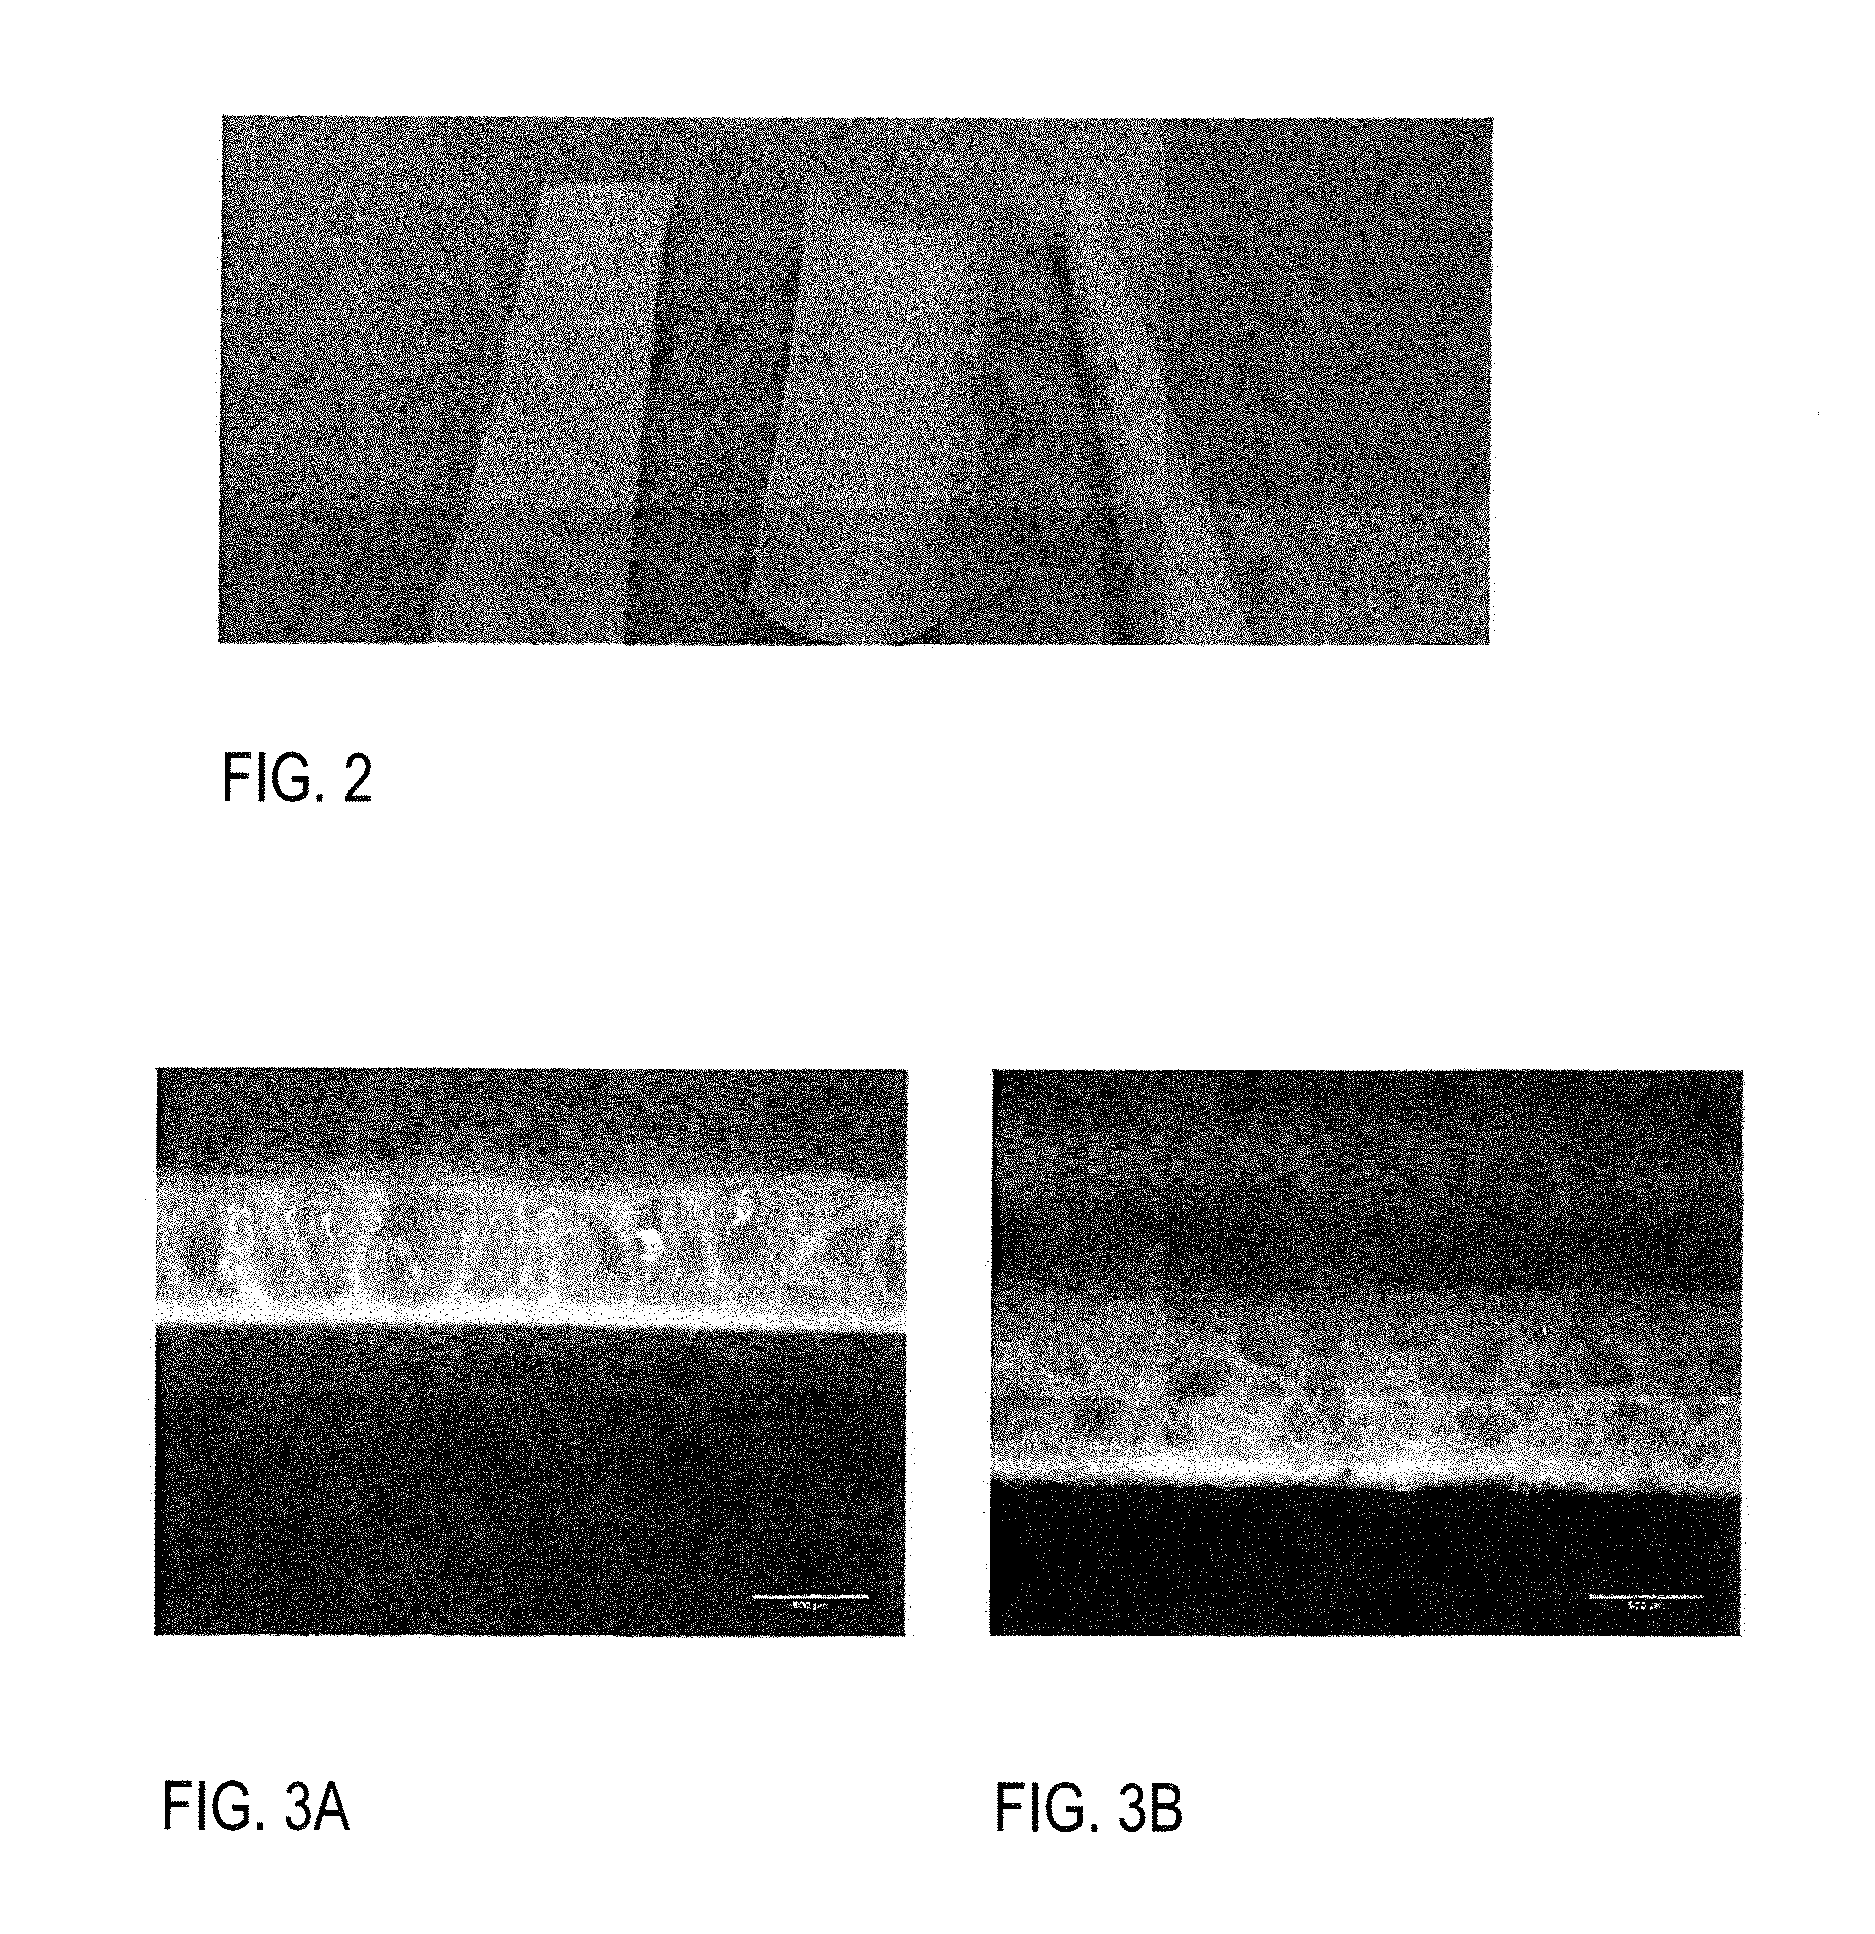 Composite sheet and manufacturing method for a foamed decorative sheet free of PVC and plasticizers